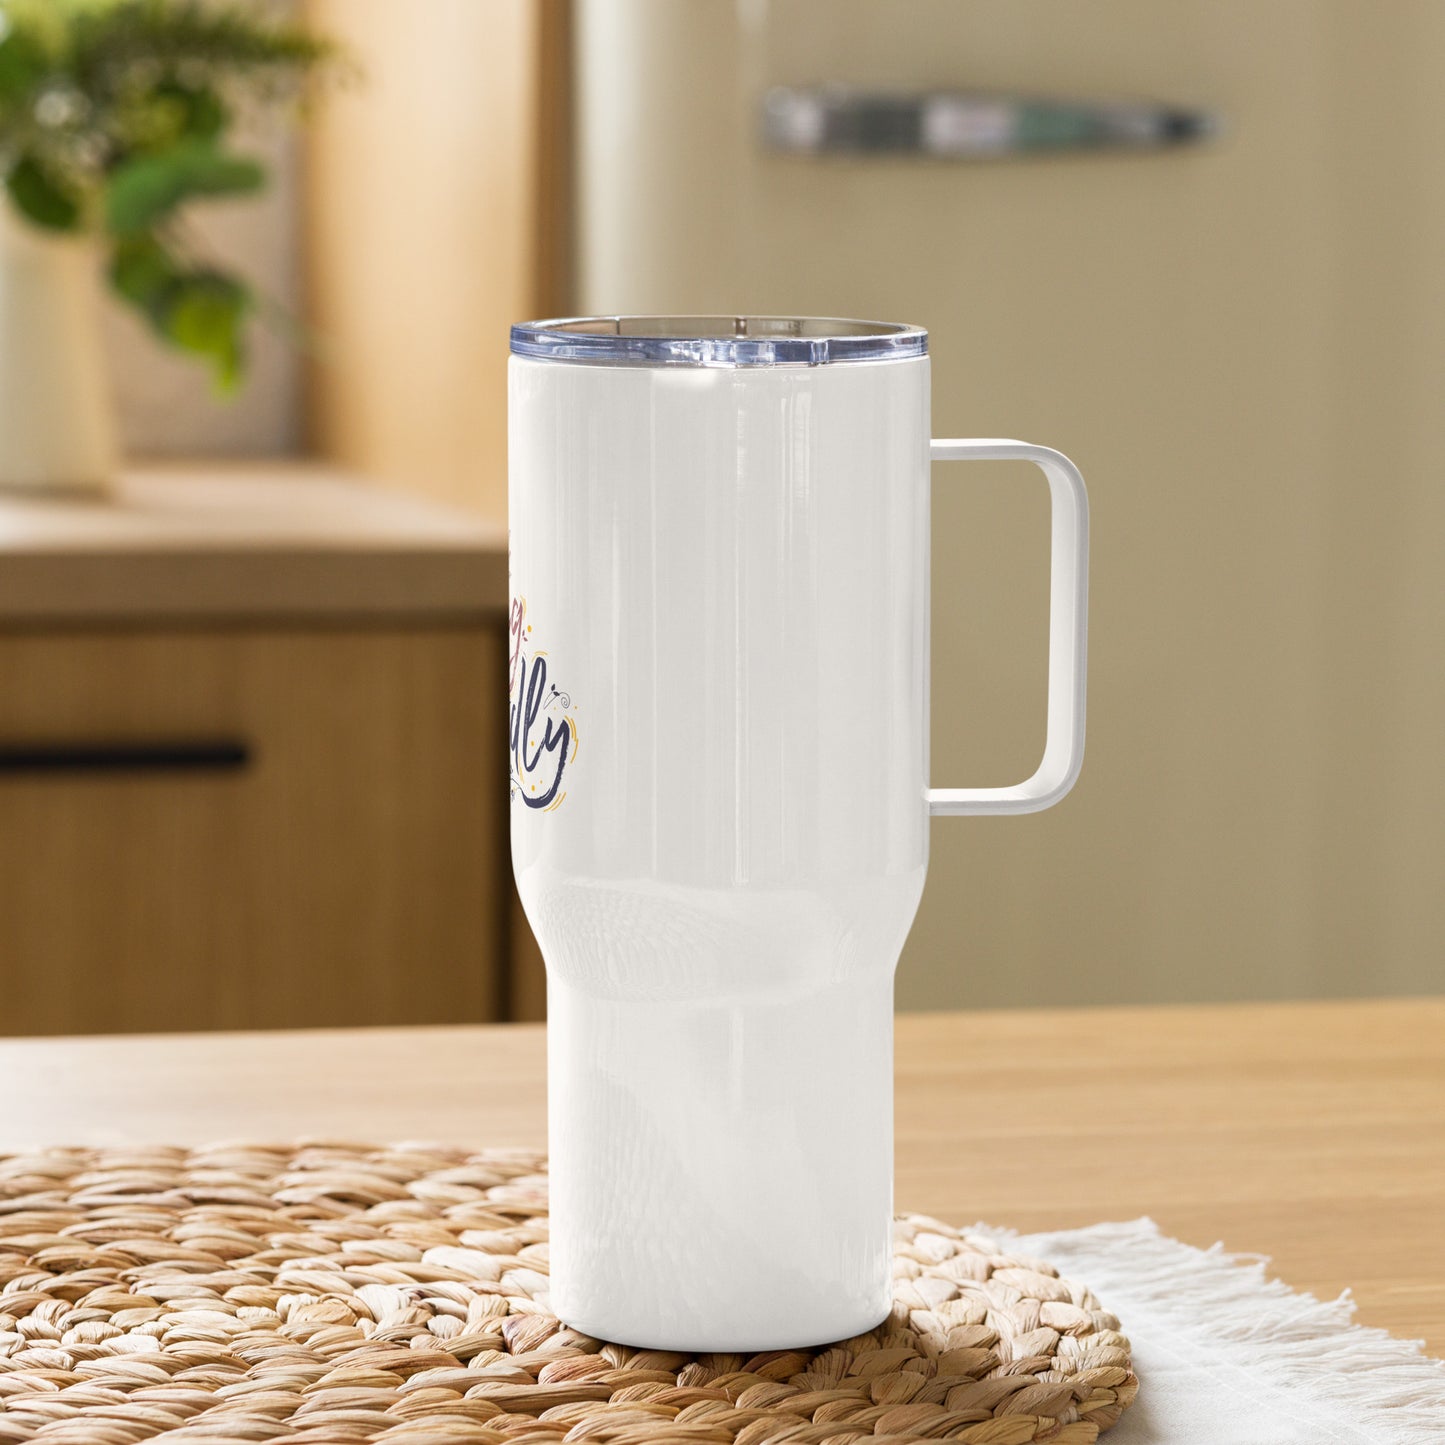 Busy Being Godly Christian Travel mug with a handle